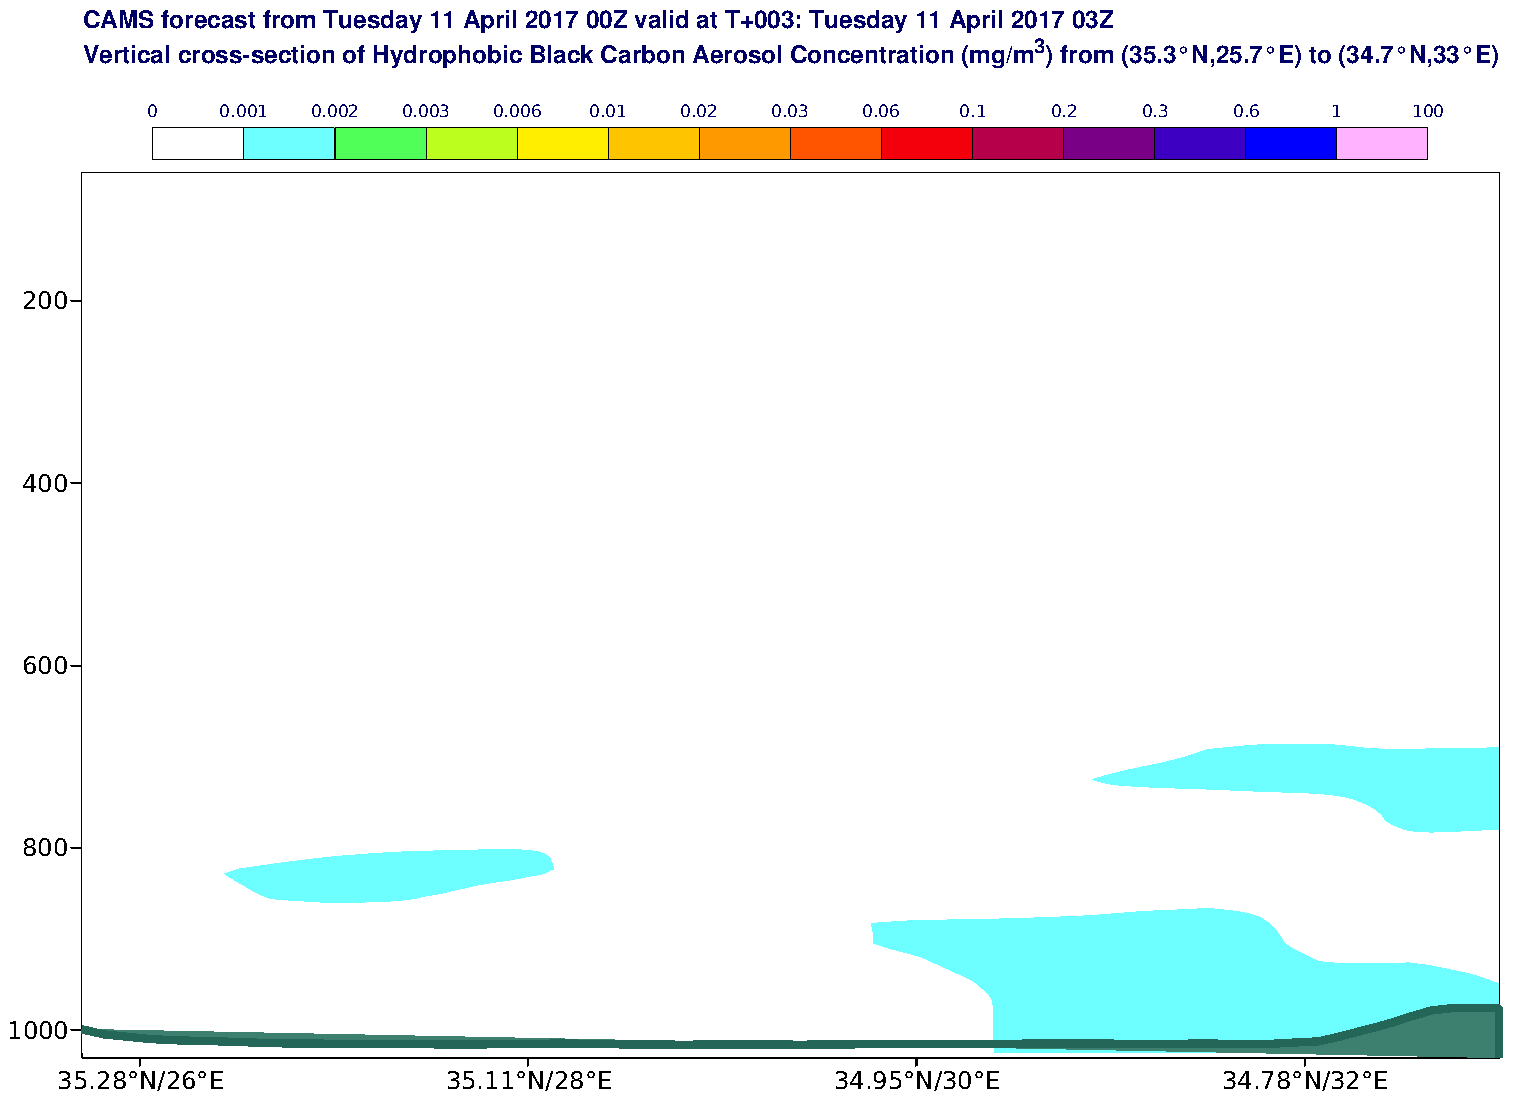 Vertical cross-section of Hydrophobic Black Carbon Aerosol Concentration (mg/m3) valid at T3 - 2017-04-11 03:00